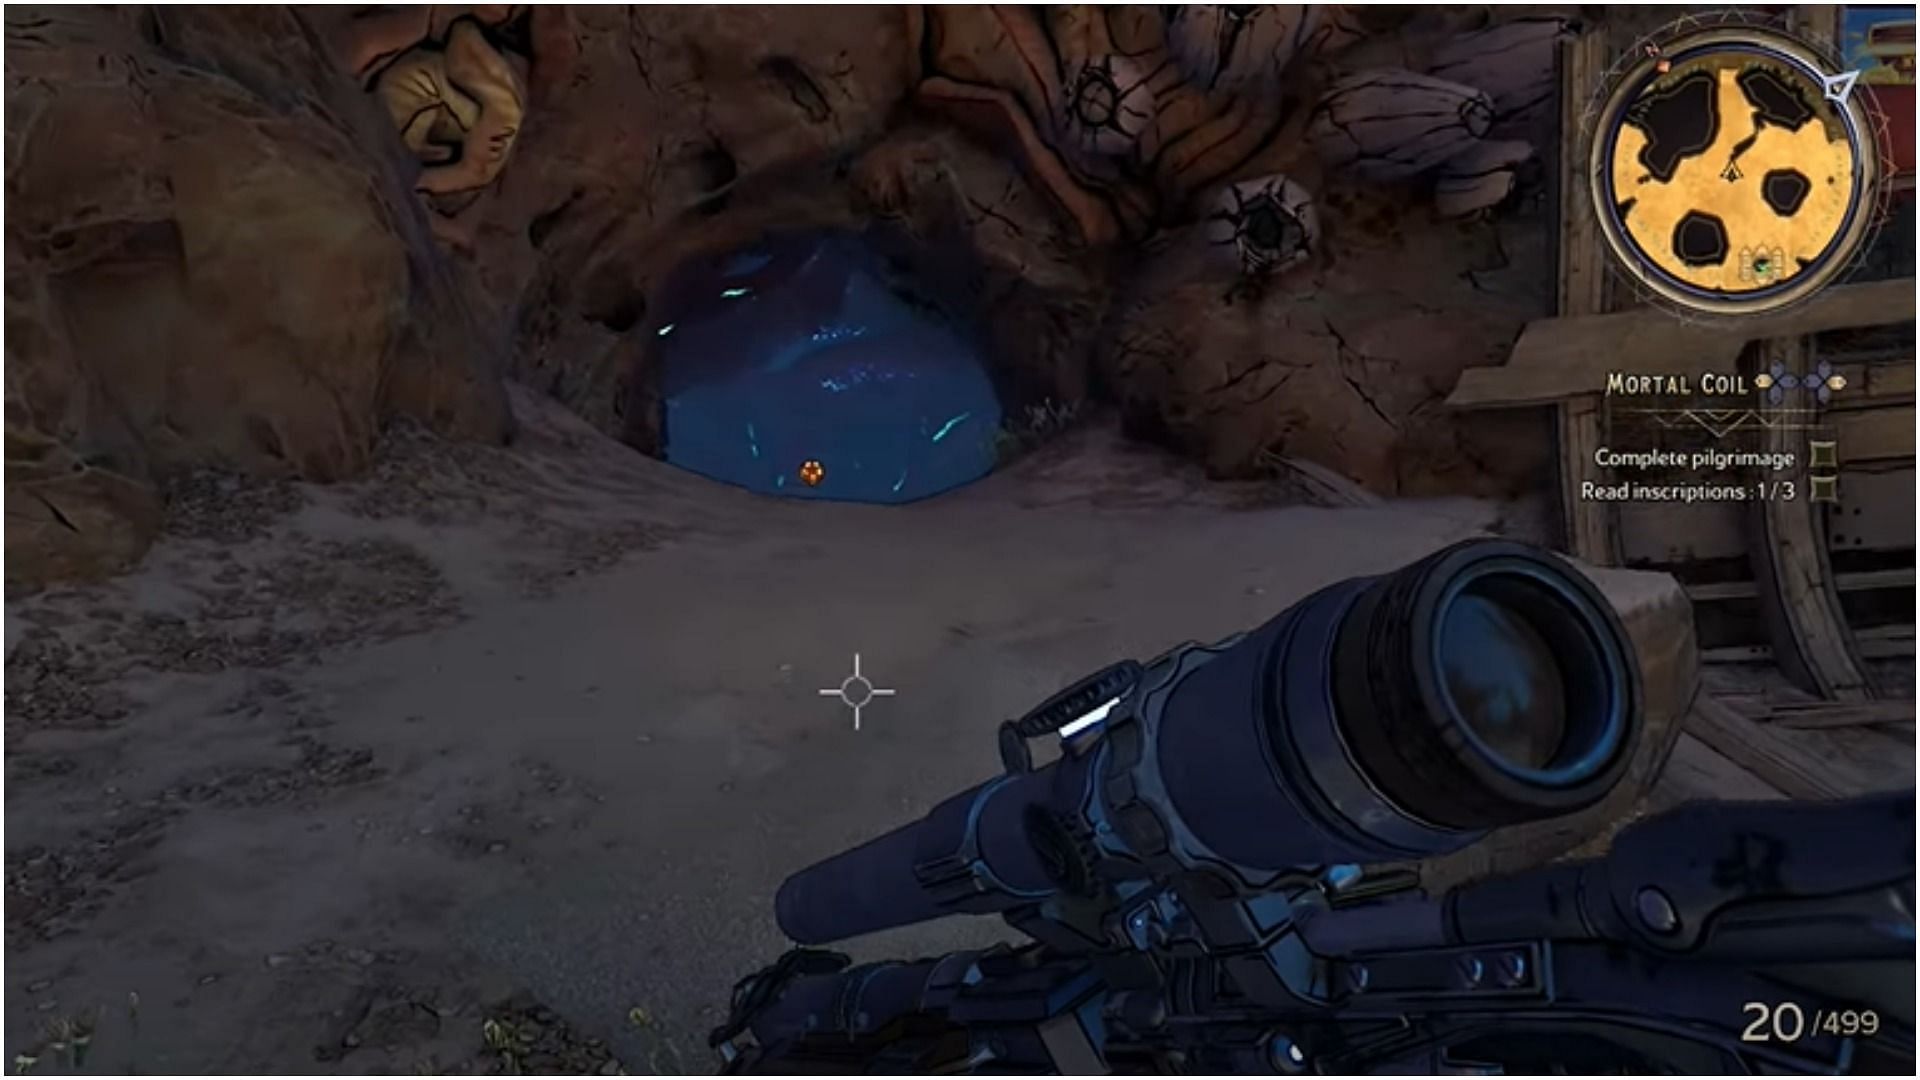 The 3rd Lucky Dice may be found after the player is close to the Rune Switch event (Image via YouTube/100% Guides)